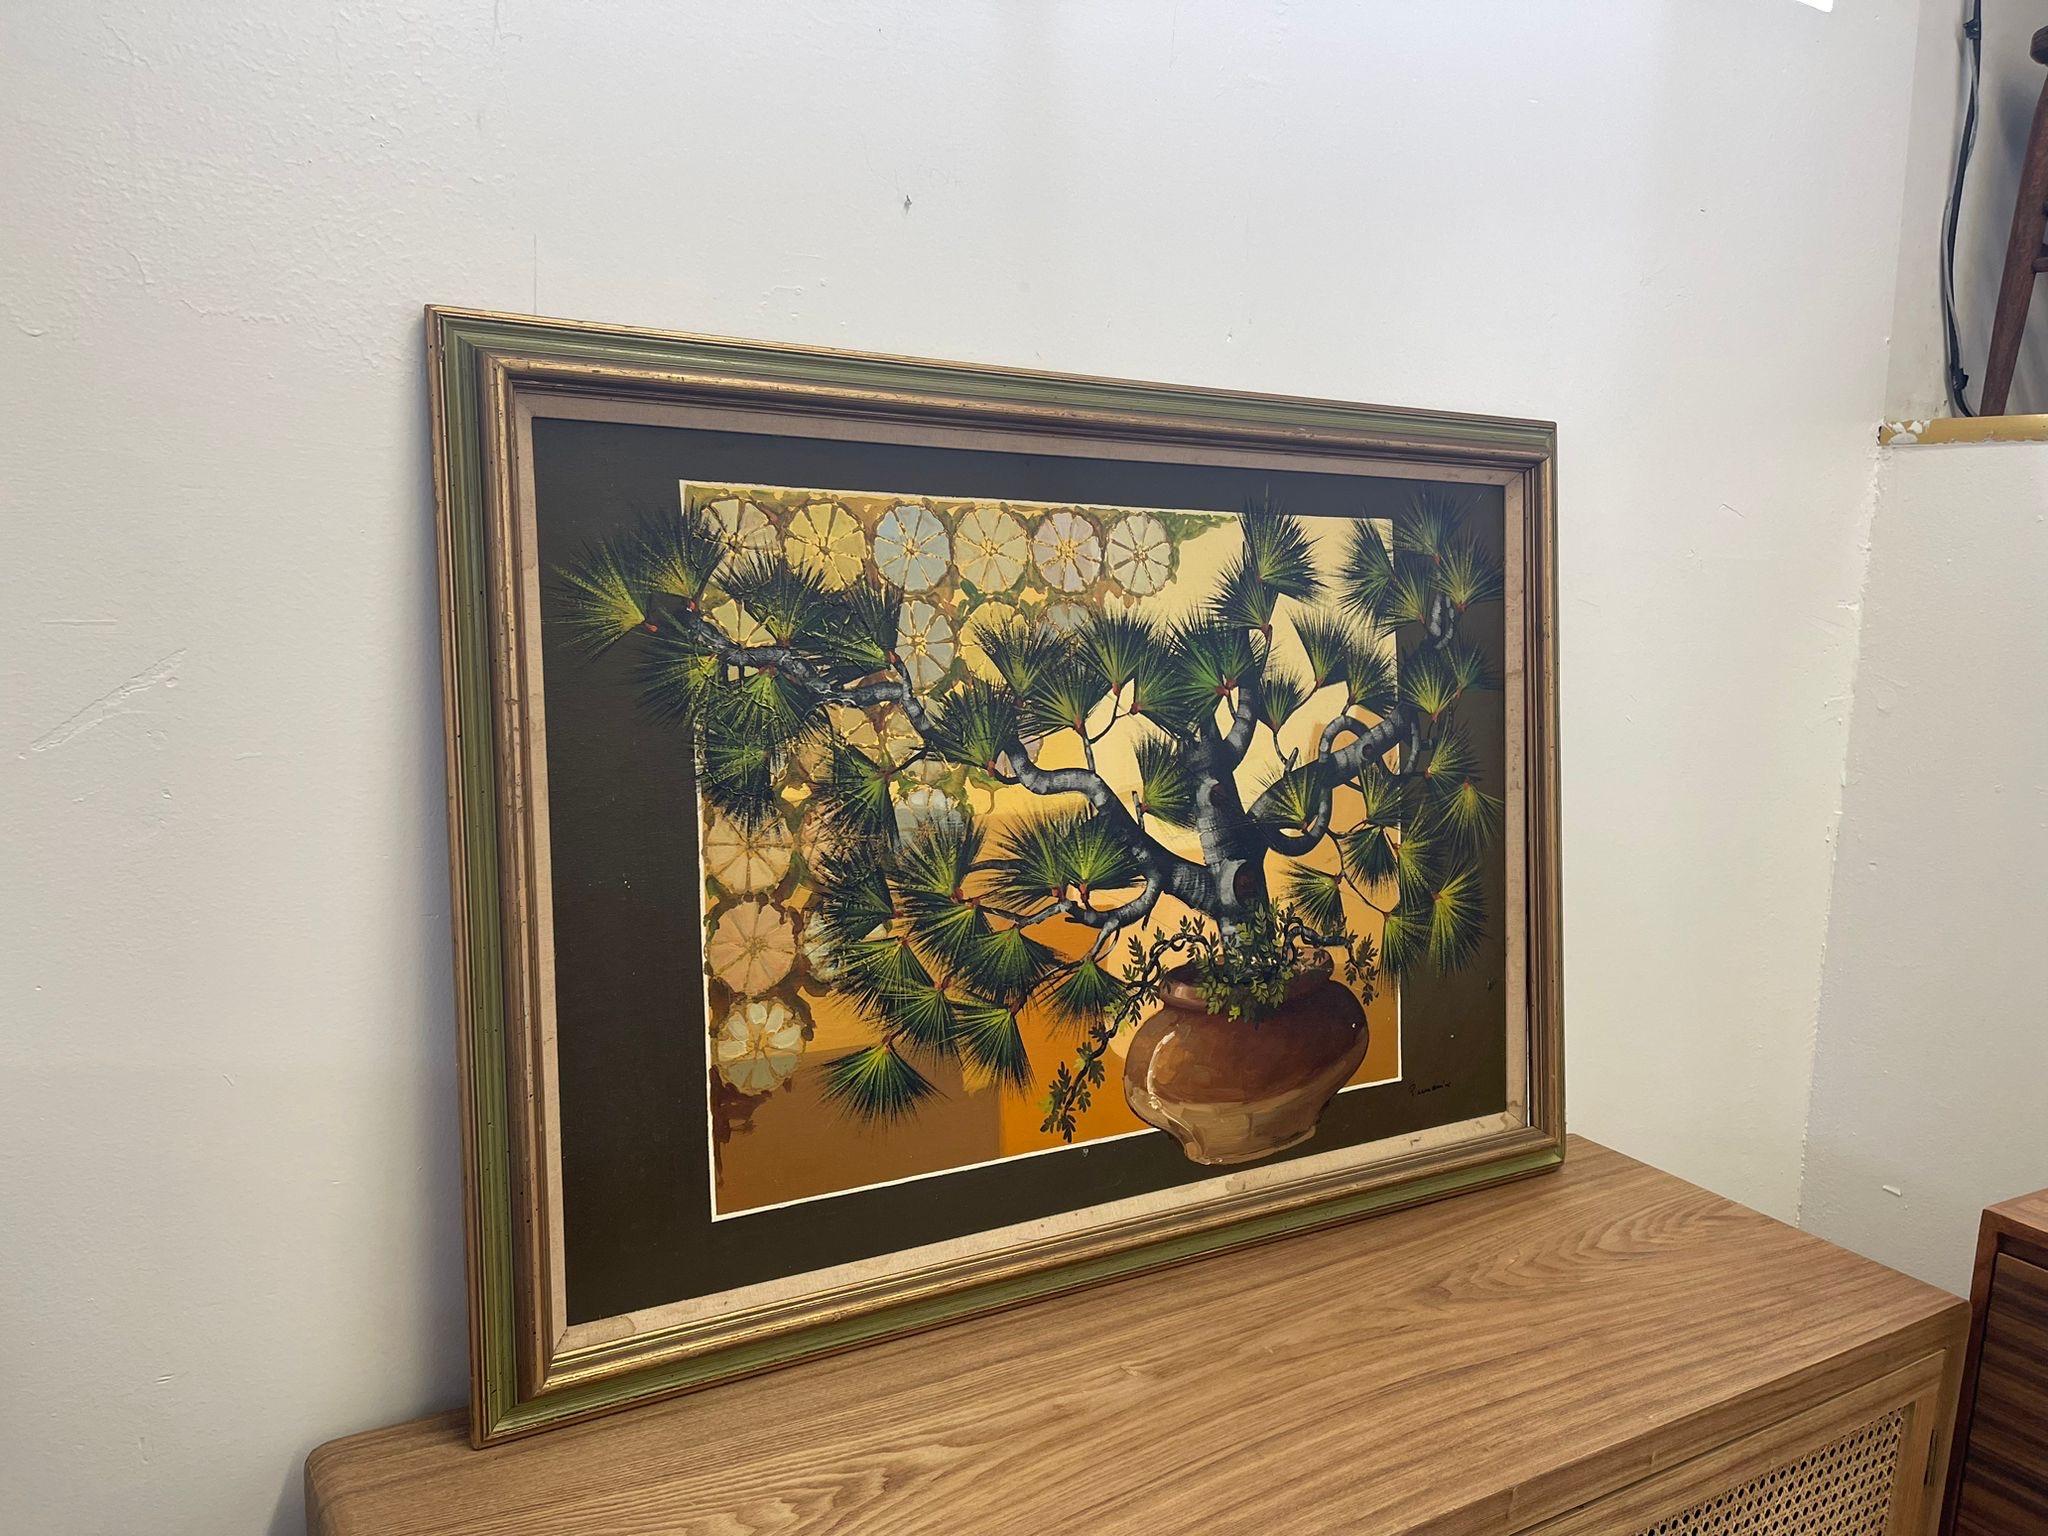 Possibly acrylic on Canvas. Beautiful tones of brown and green. Signed in the Lower Corner. Vintage Condition Consistent with Age as Pictured.

Dimensions. 41 W ; 1 D ; 29 H